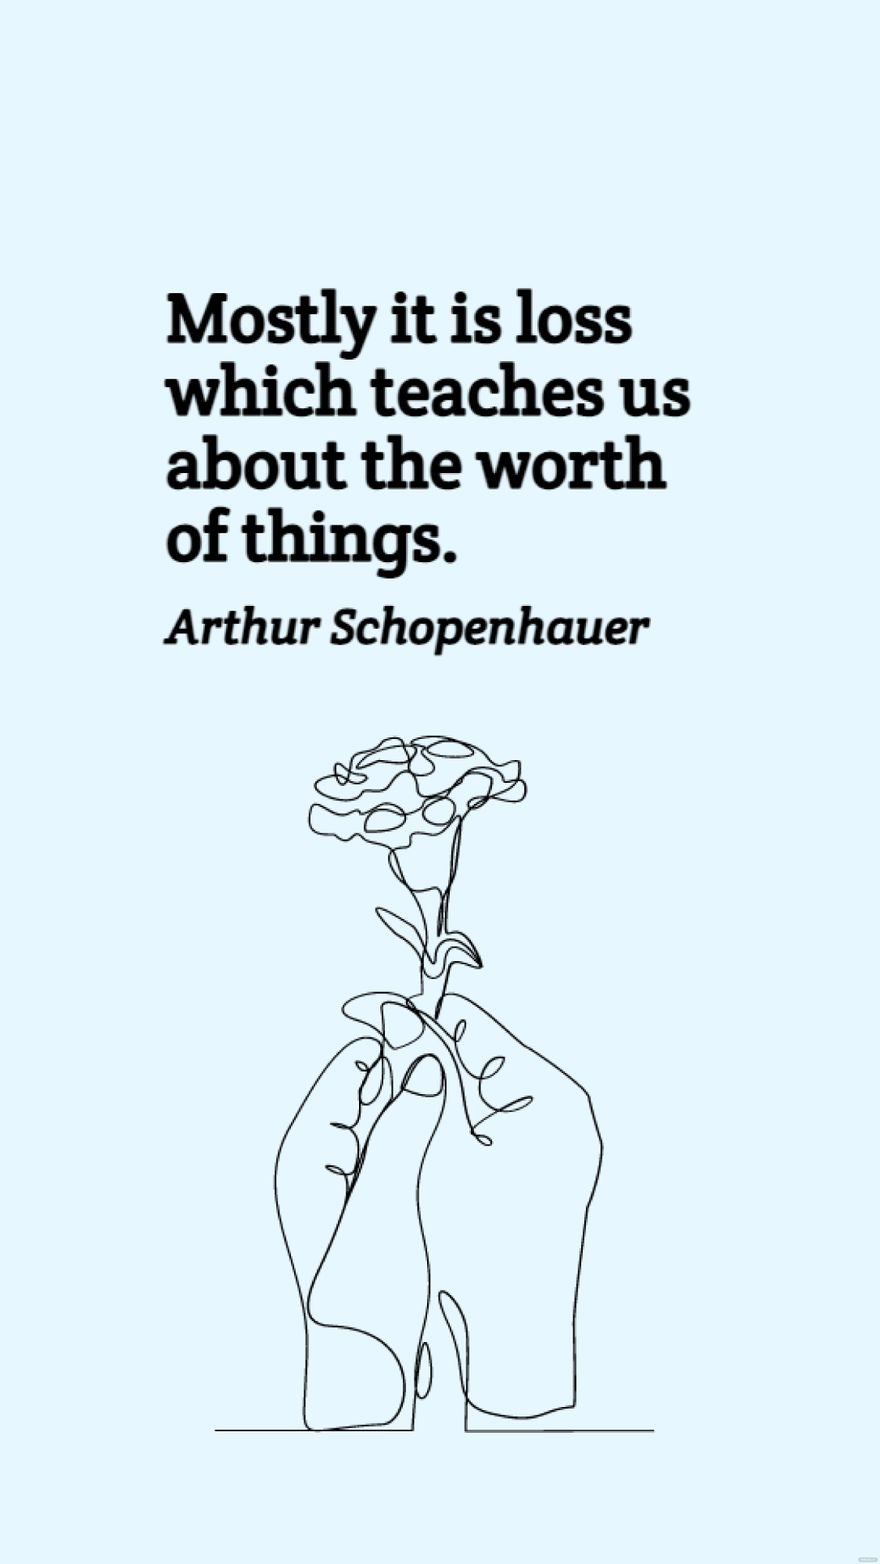 Arthur Schopenhauer - Mostly it is loss which teaches us about the worth of things. in JPG